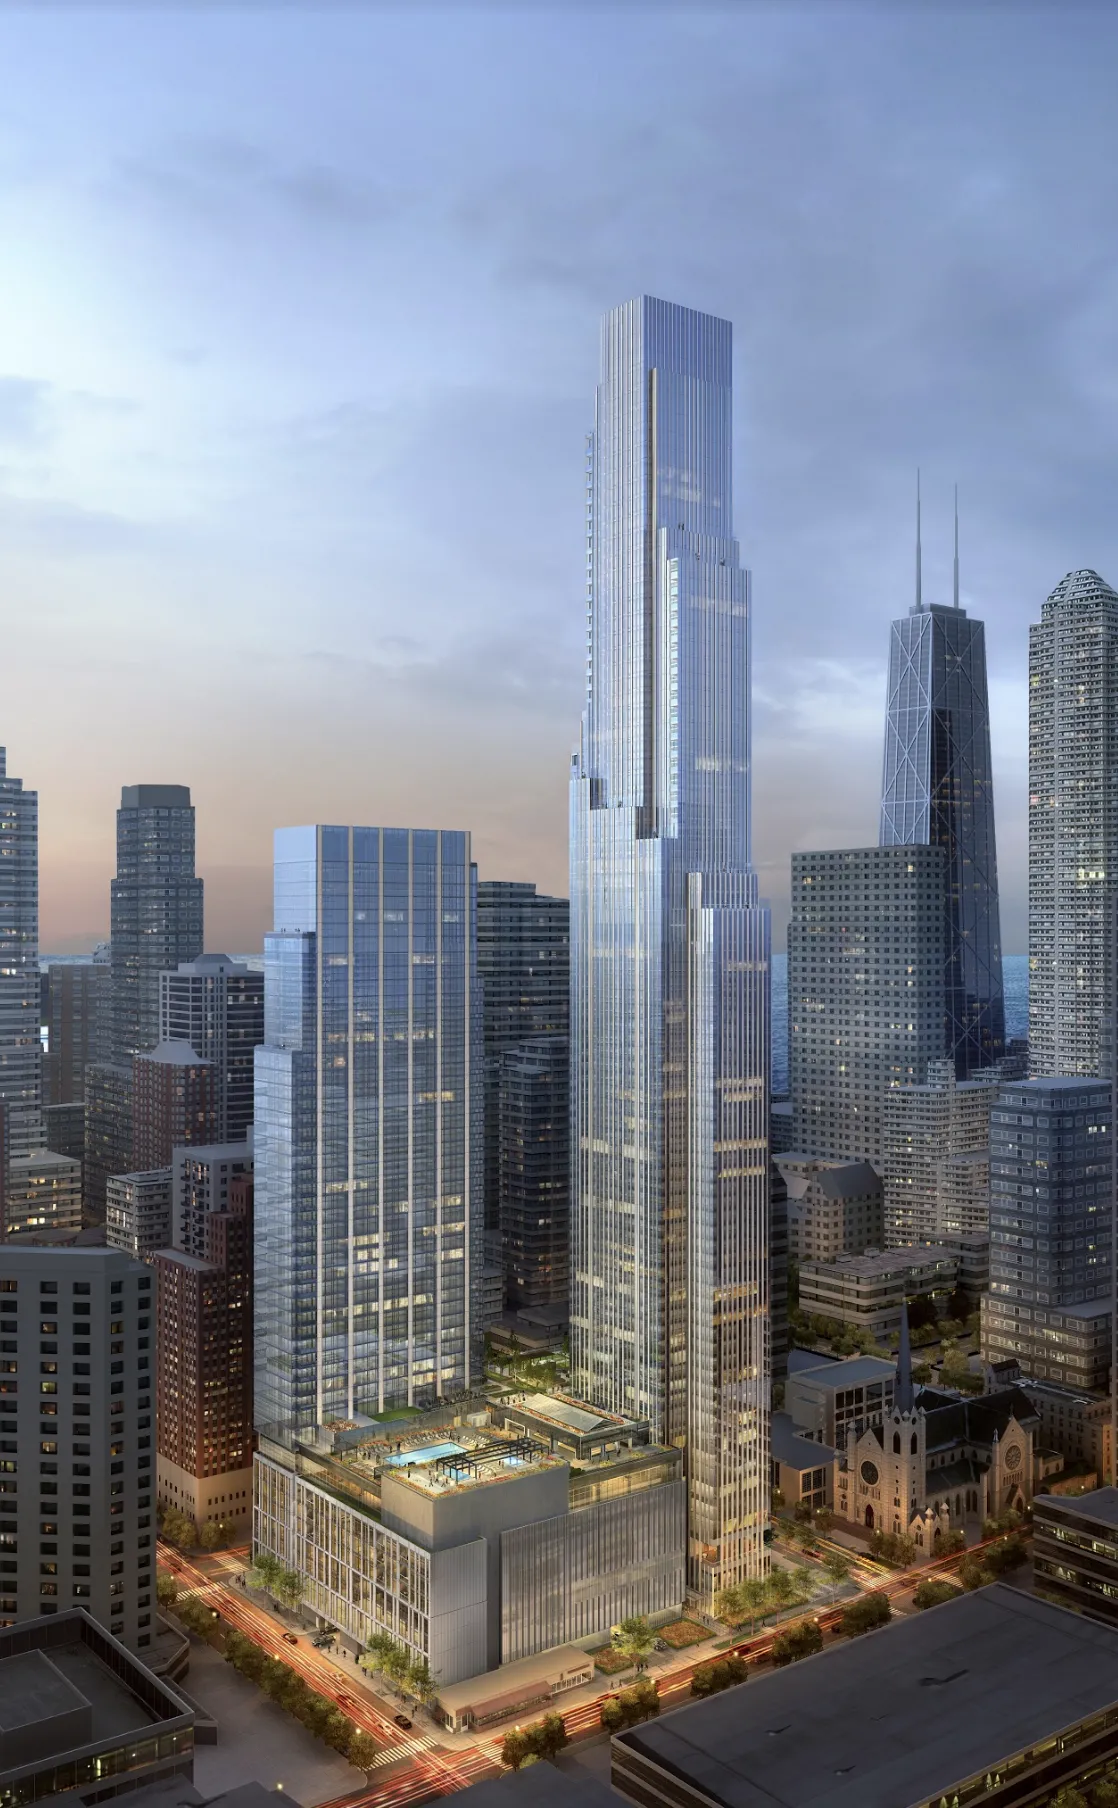 Water Tower Place owner gives up the property - Chicago Sun-Times